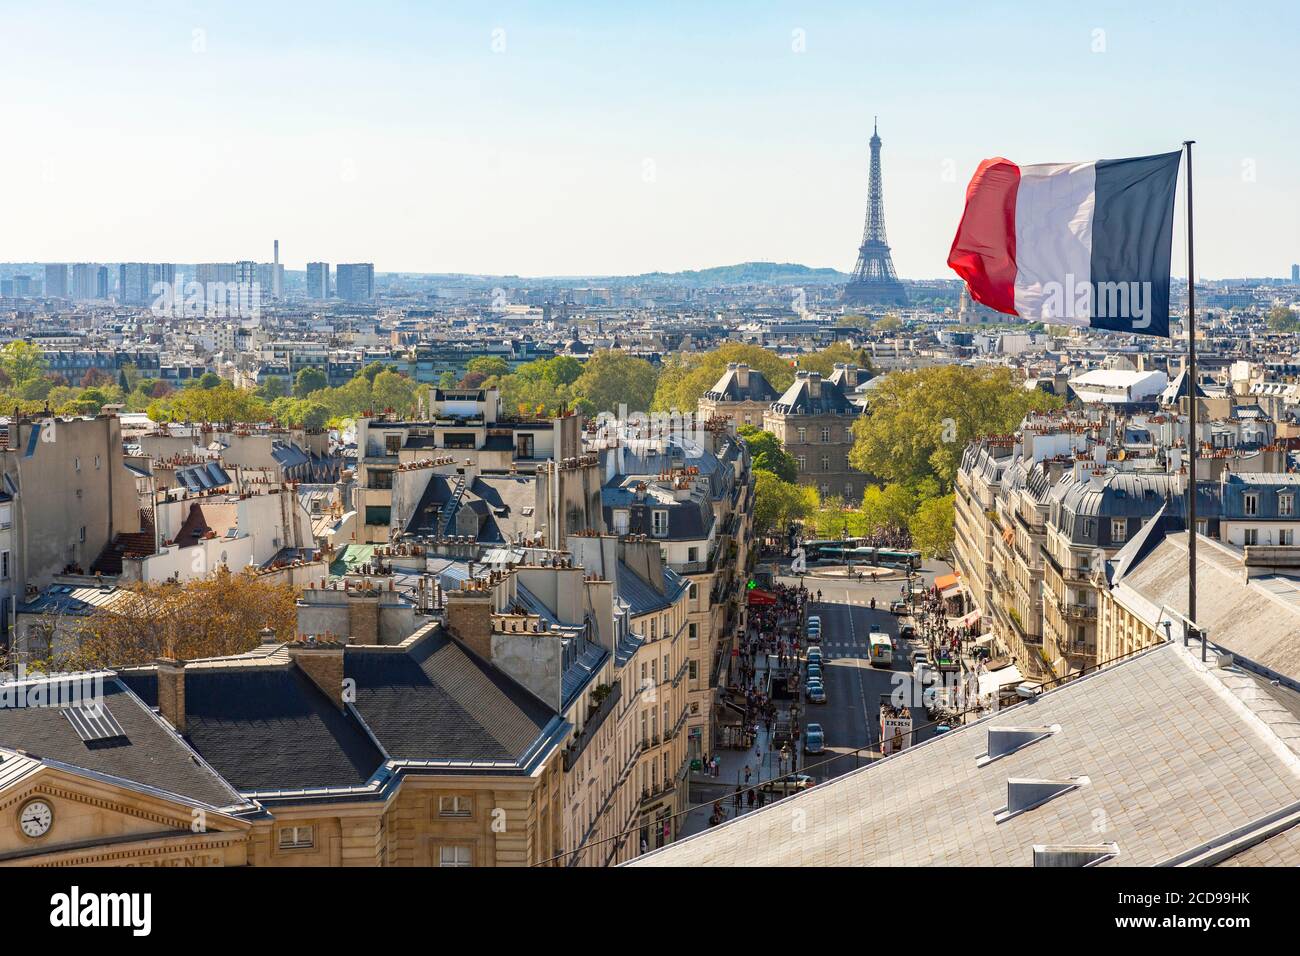 France, Paris, Latin Quarter, Pantheon (1790) neoclassical style, rooftops and Eiffel Tower Stock Photo